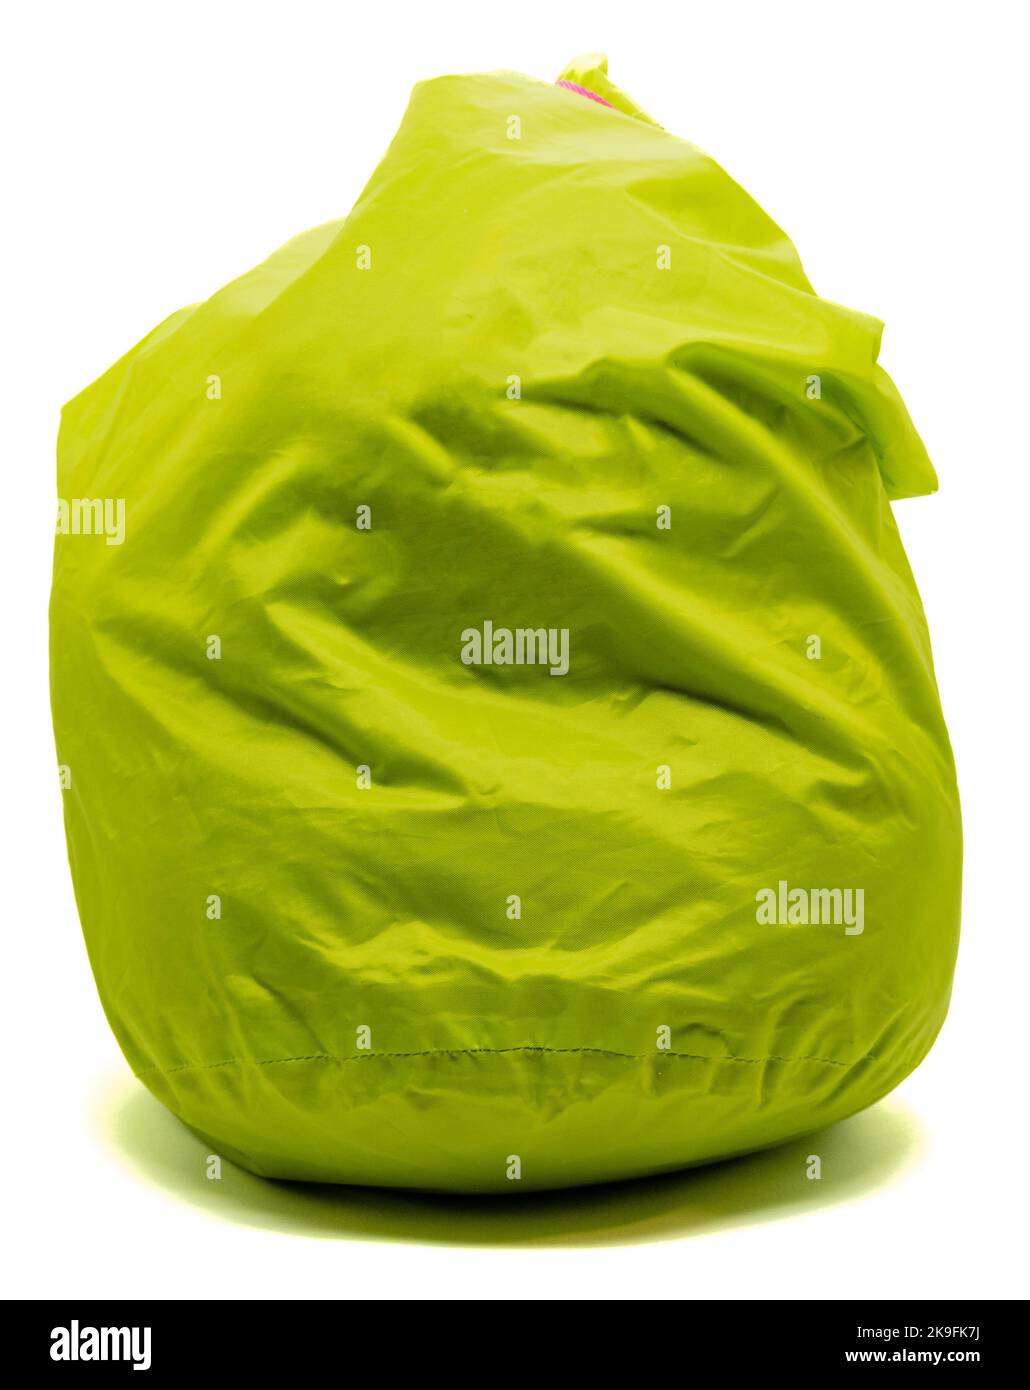 Bright green dry bag isolated on white background Stock Photo